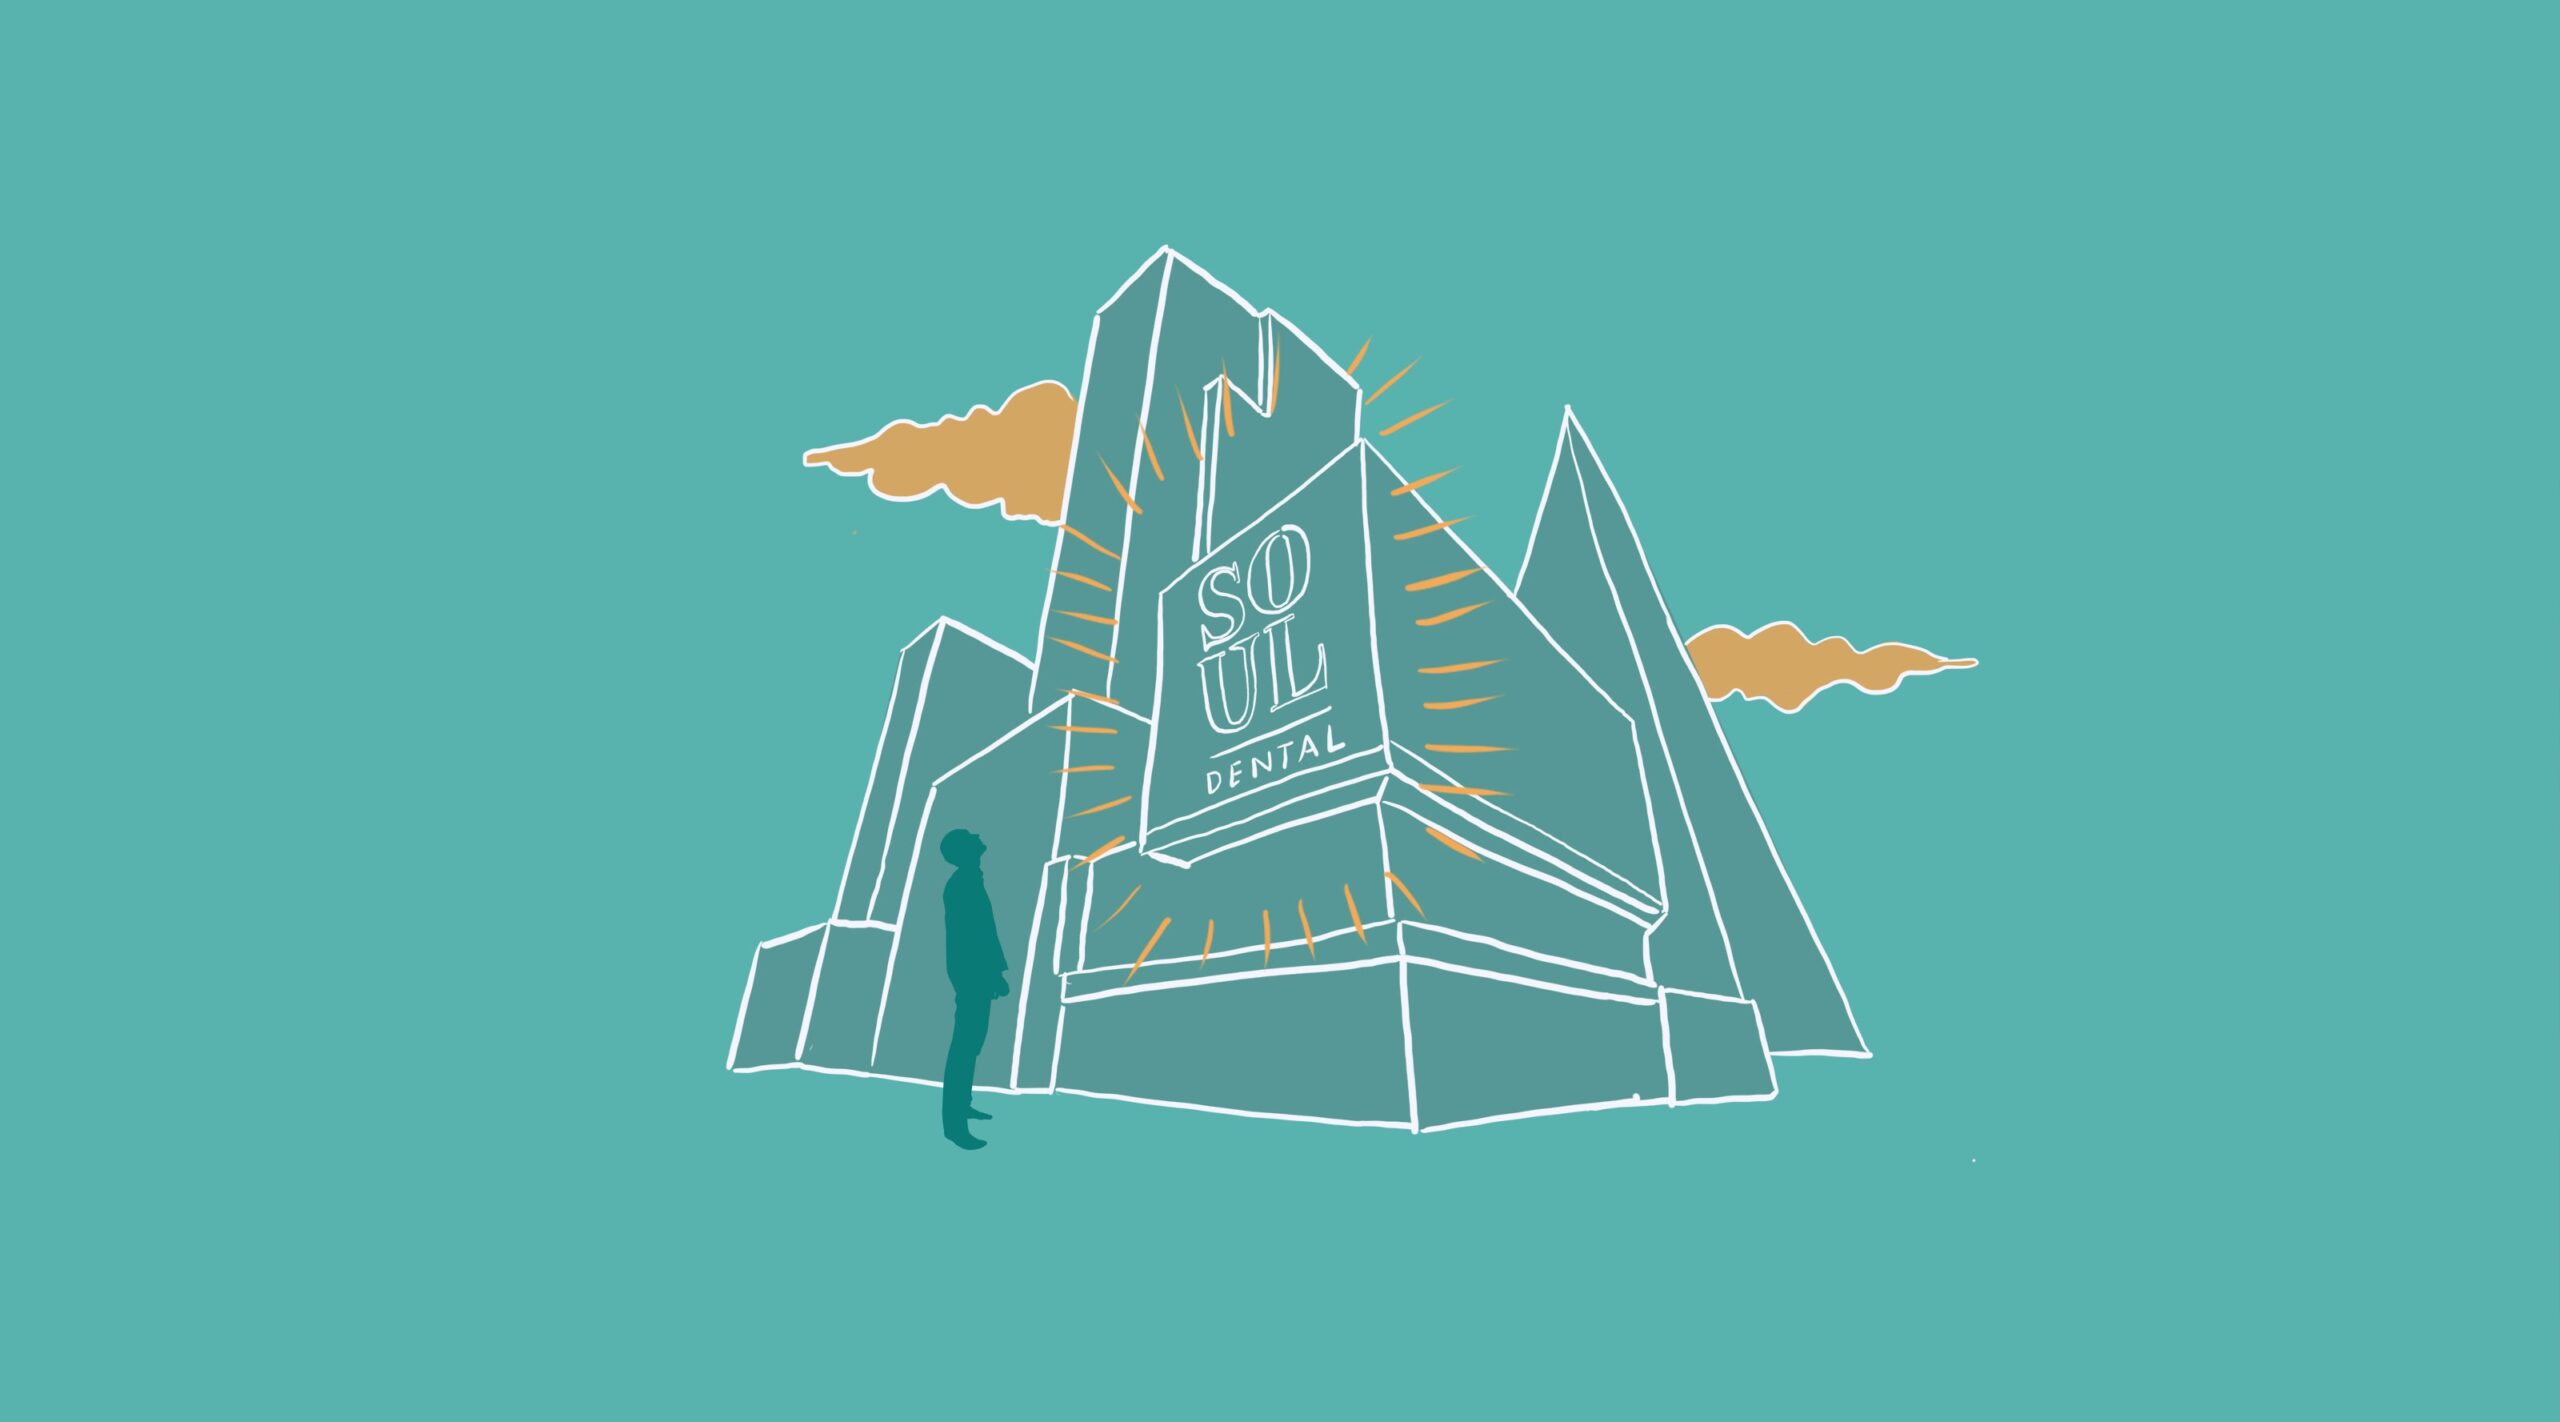 Soul Dental logo: Chalk-sketched city building with SOUL DENTAL on one side. Silhouette of person looking up at it.